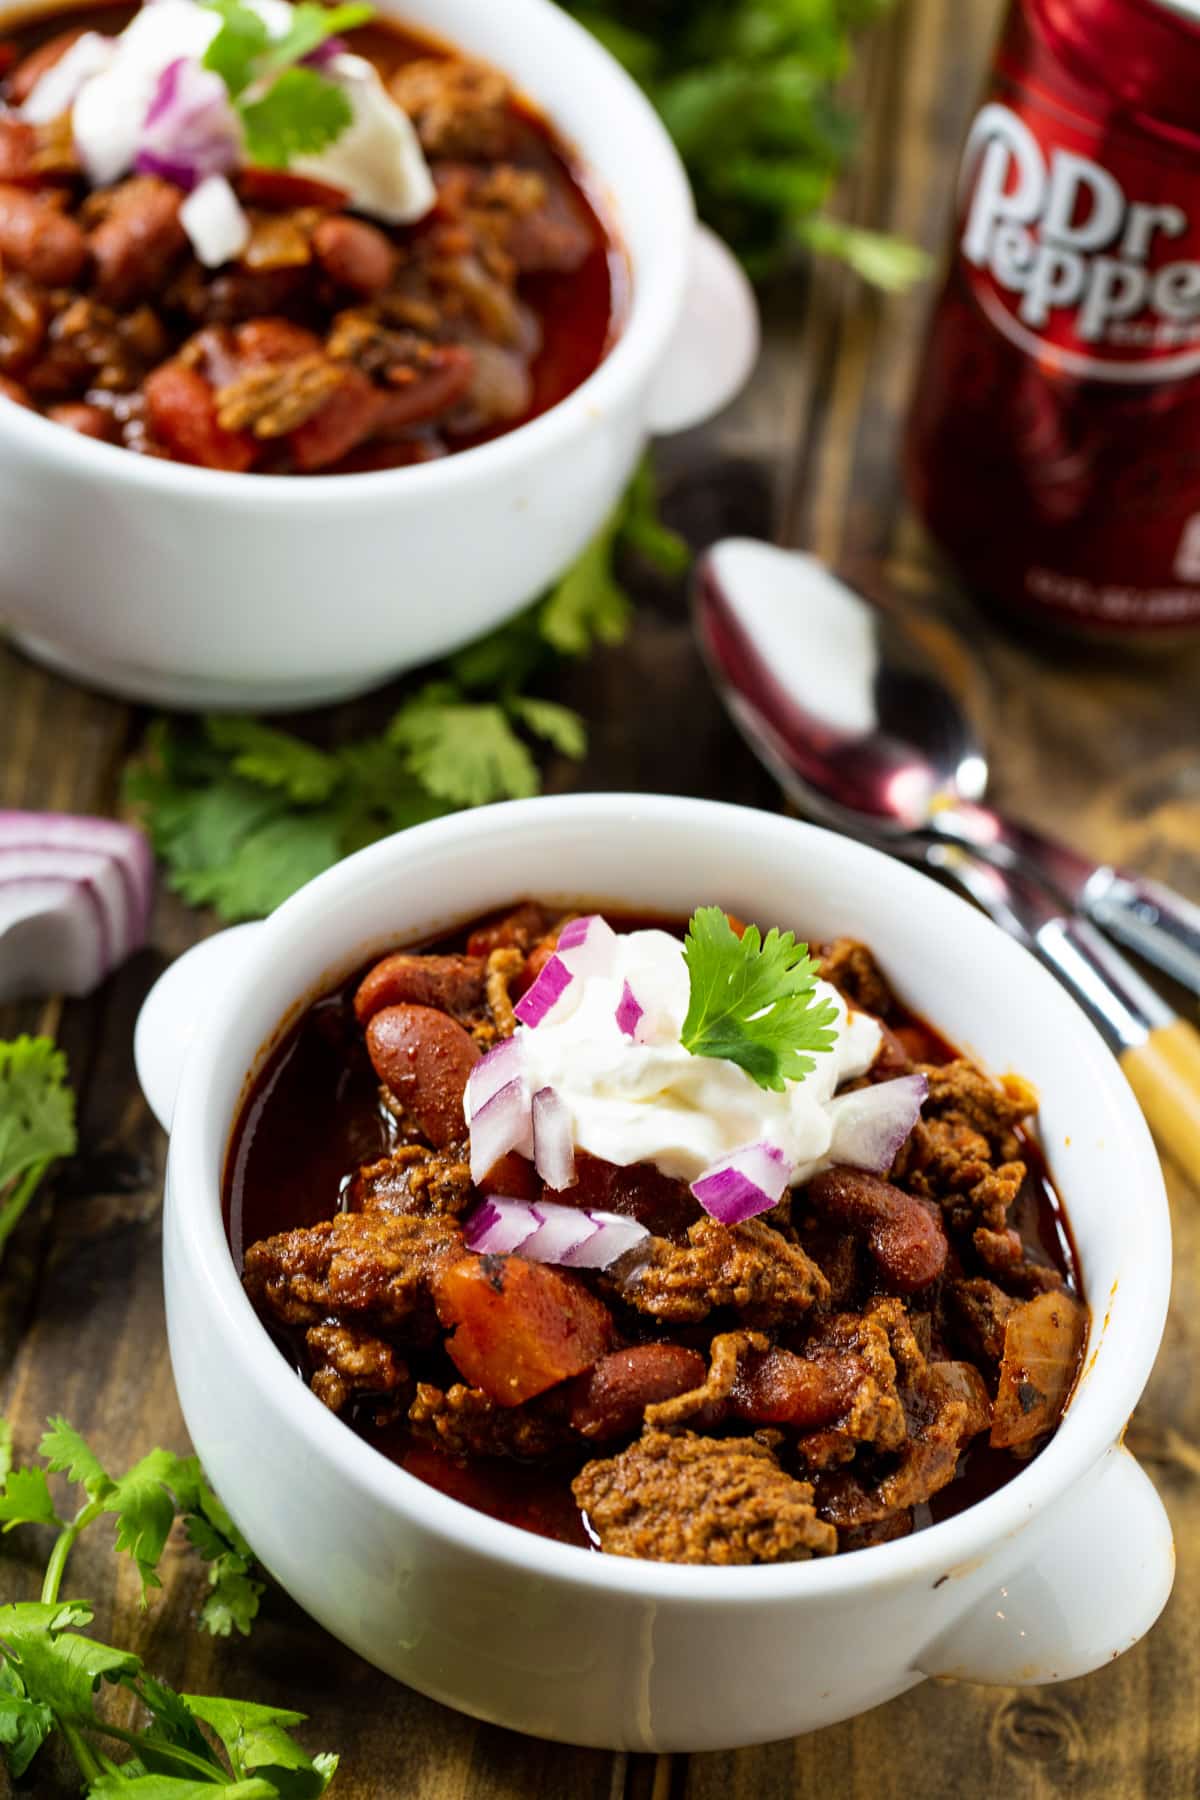 Chili in two bowls.